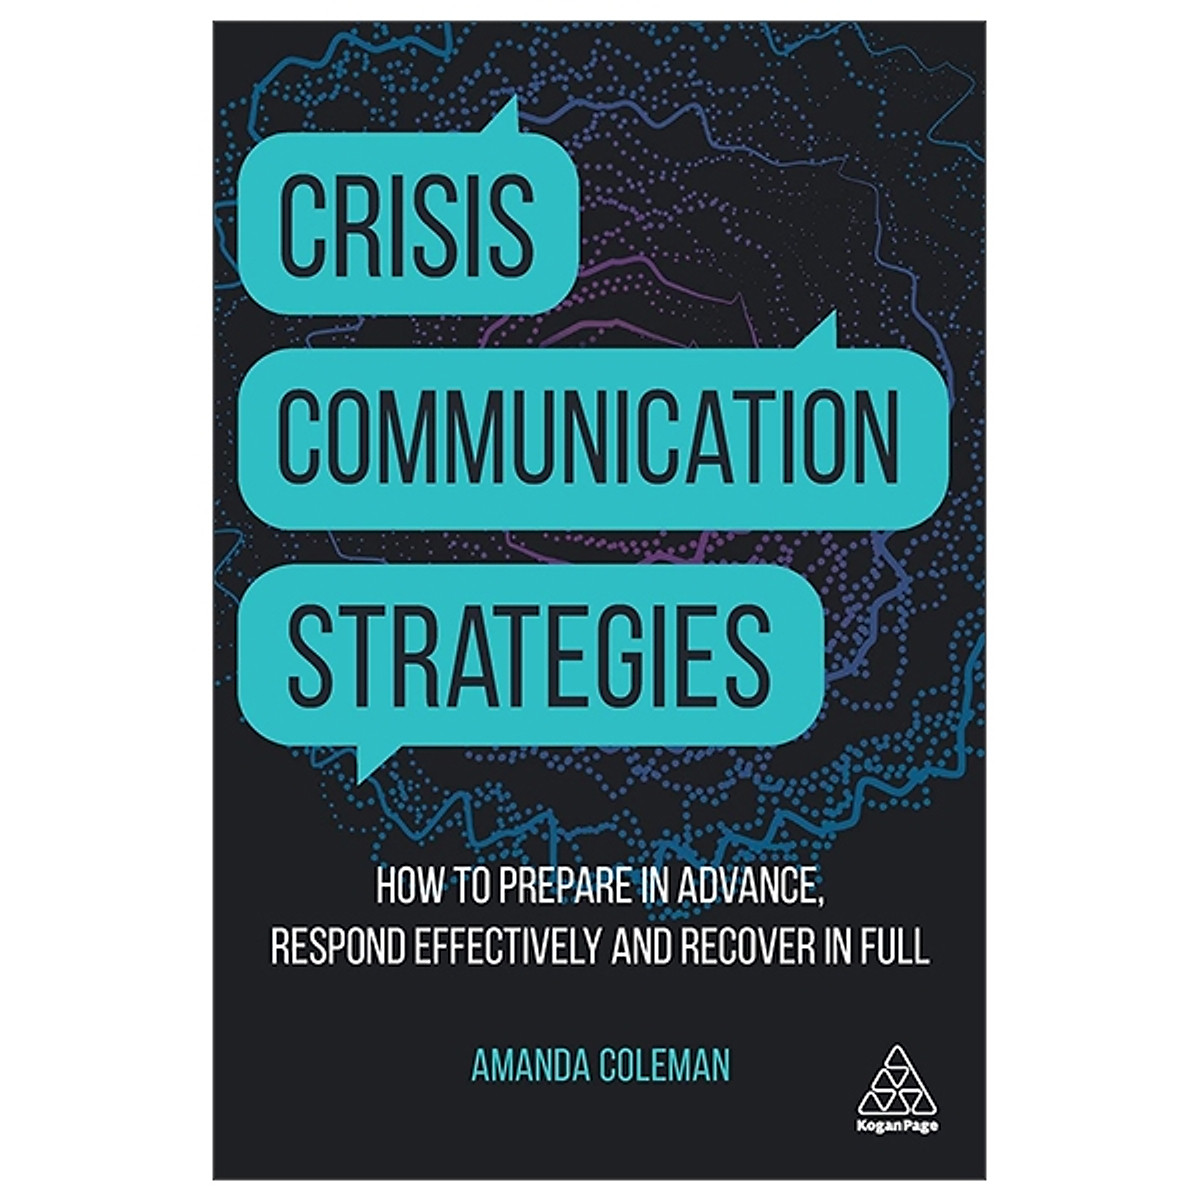 Crisis Communication Strategies: How To Prepare In Advance, Respond Effectively And Recover In Full